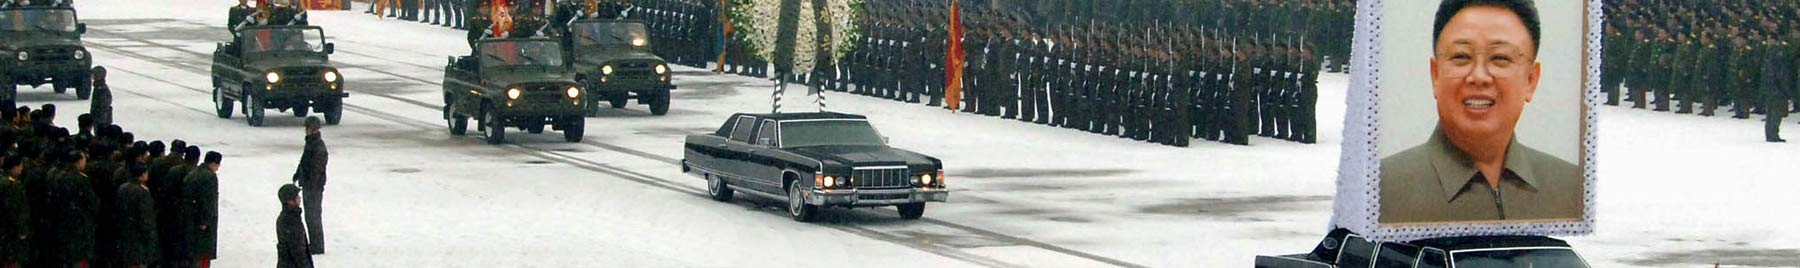 Kim Jong-il&rsquo;s funeral procession in 2011 in Pyongyang, North Korea.